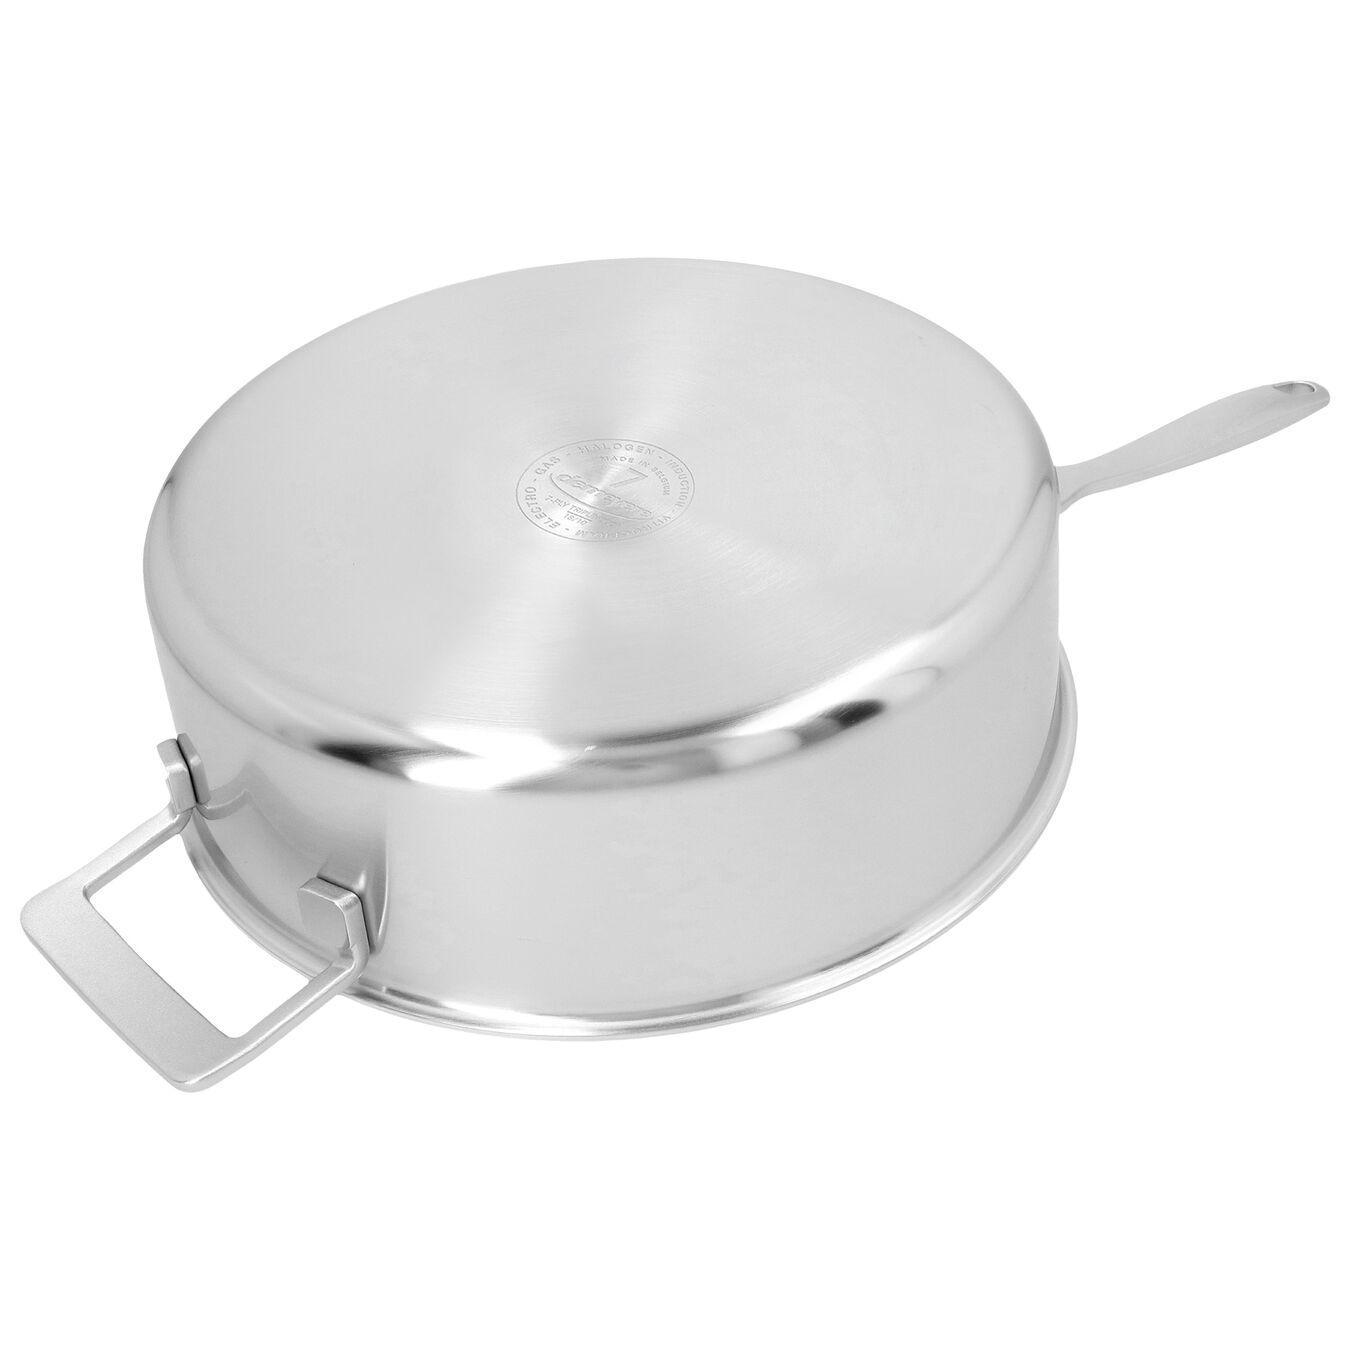 28 cm 18/10 Stainless Steel Saute pan with lid,,large 3